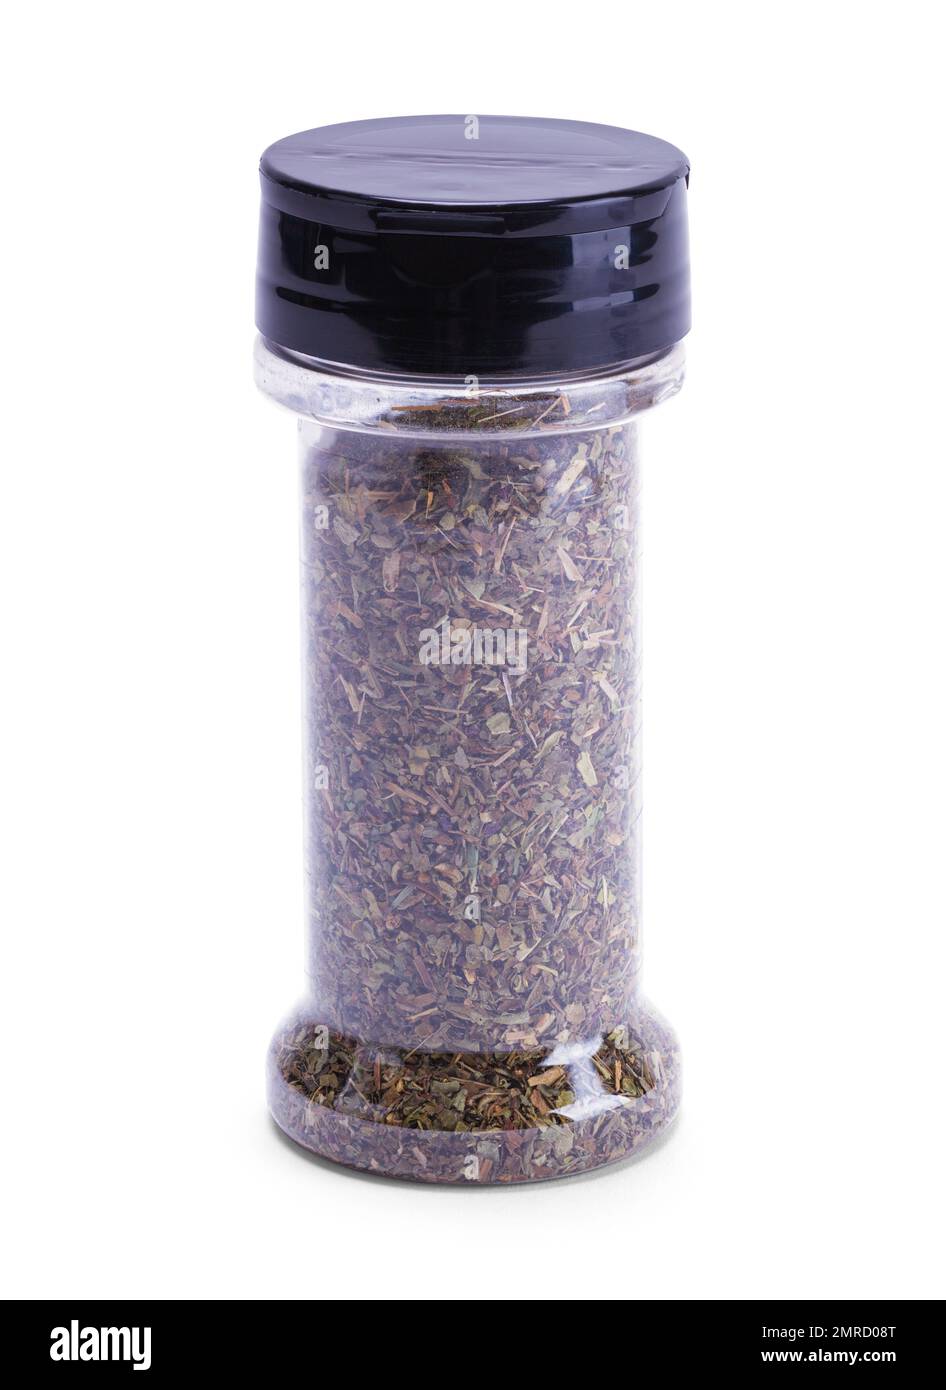 Jar of Basil Spice Cut Out on White. Stock Photo